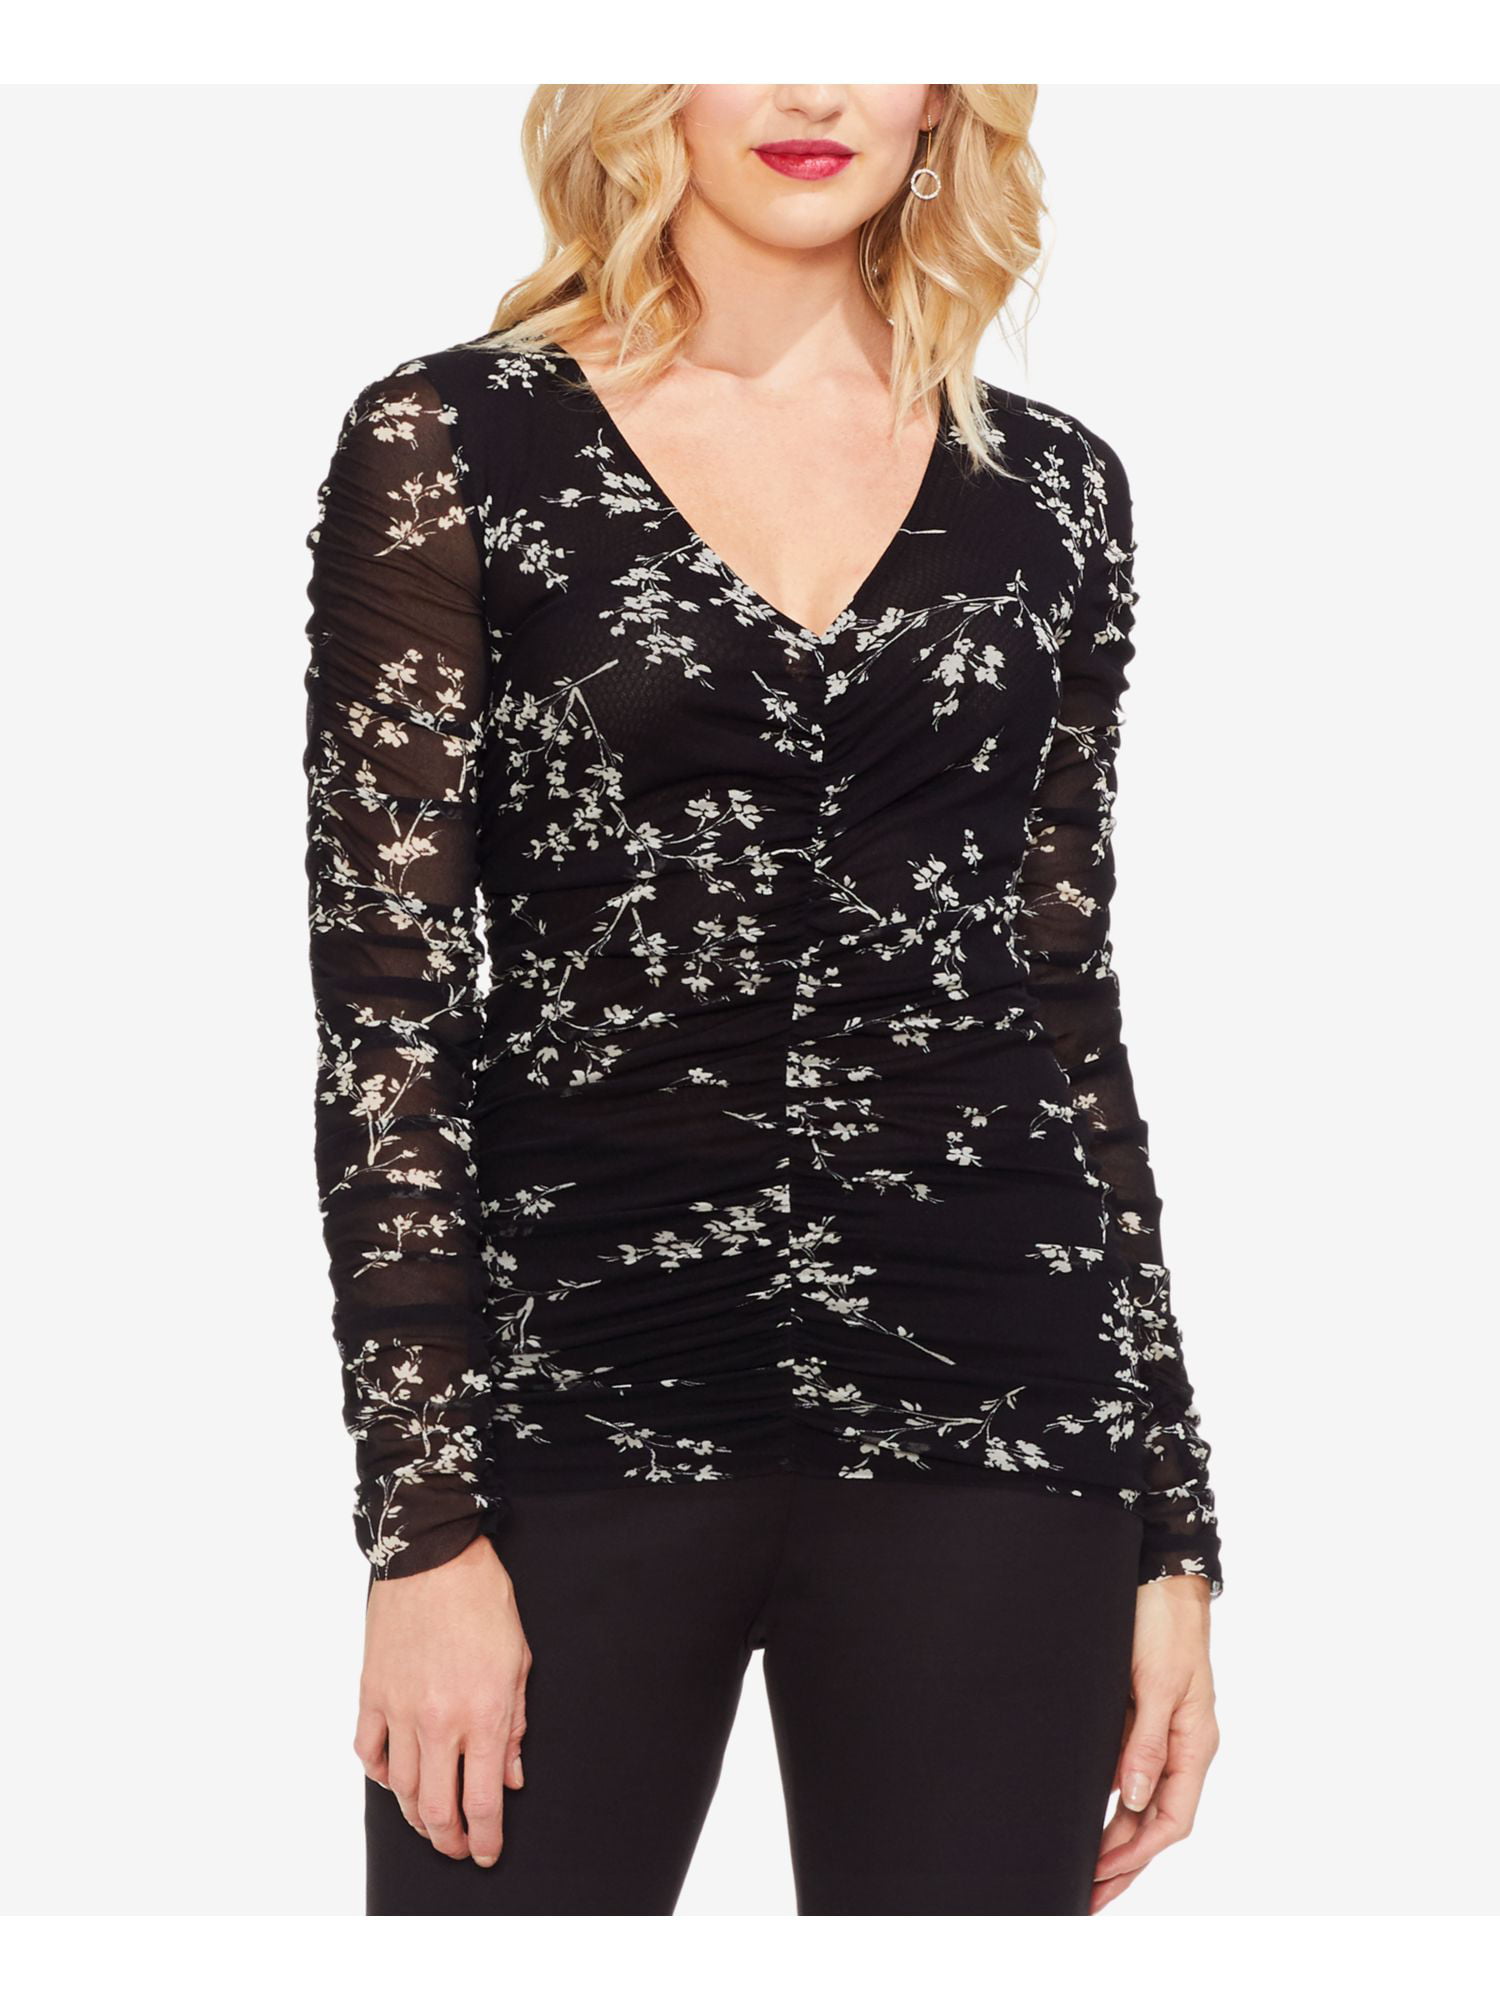 Vince Camuto - VINCE CAMUTO Womens Black Floral Long Sleeve V Neck Top